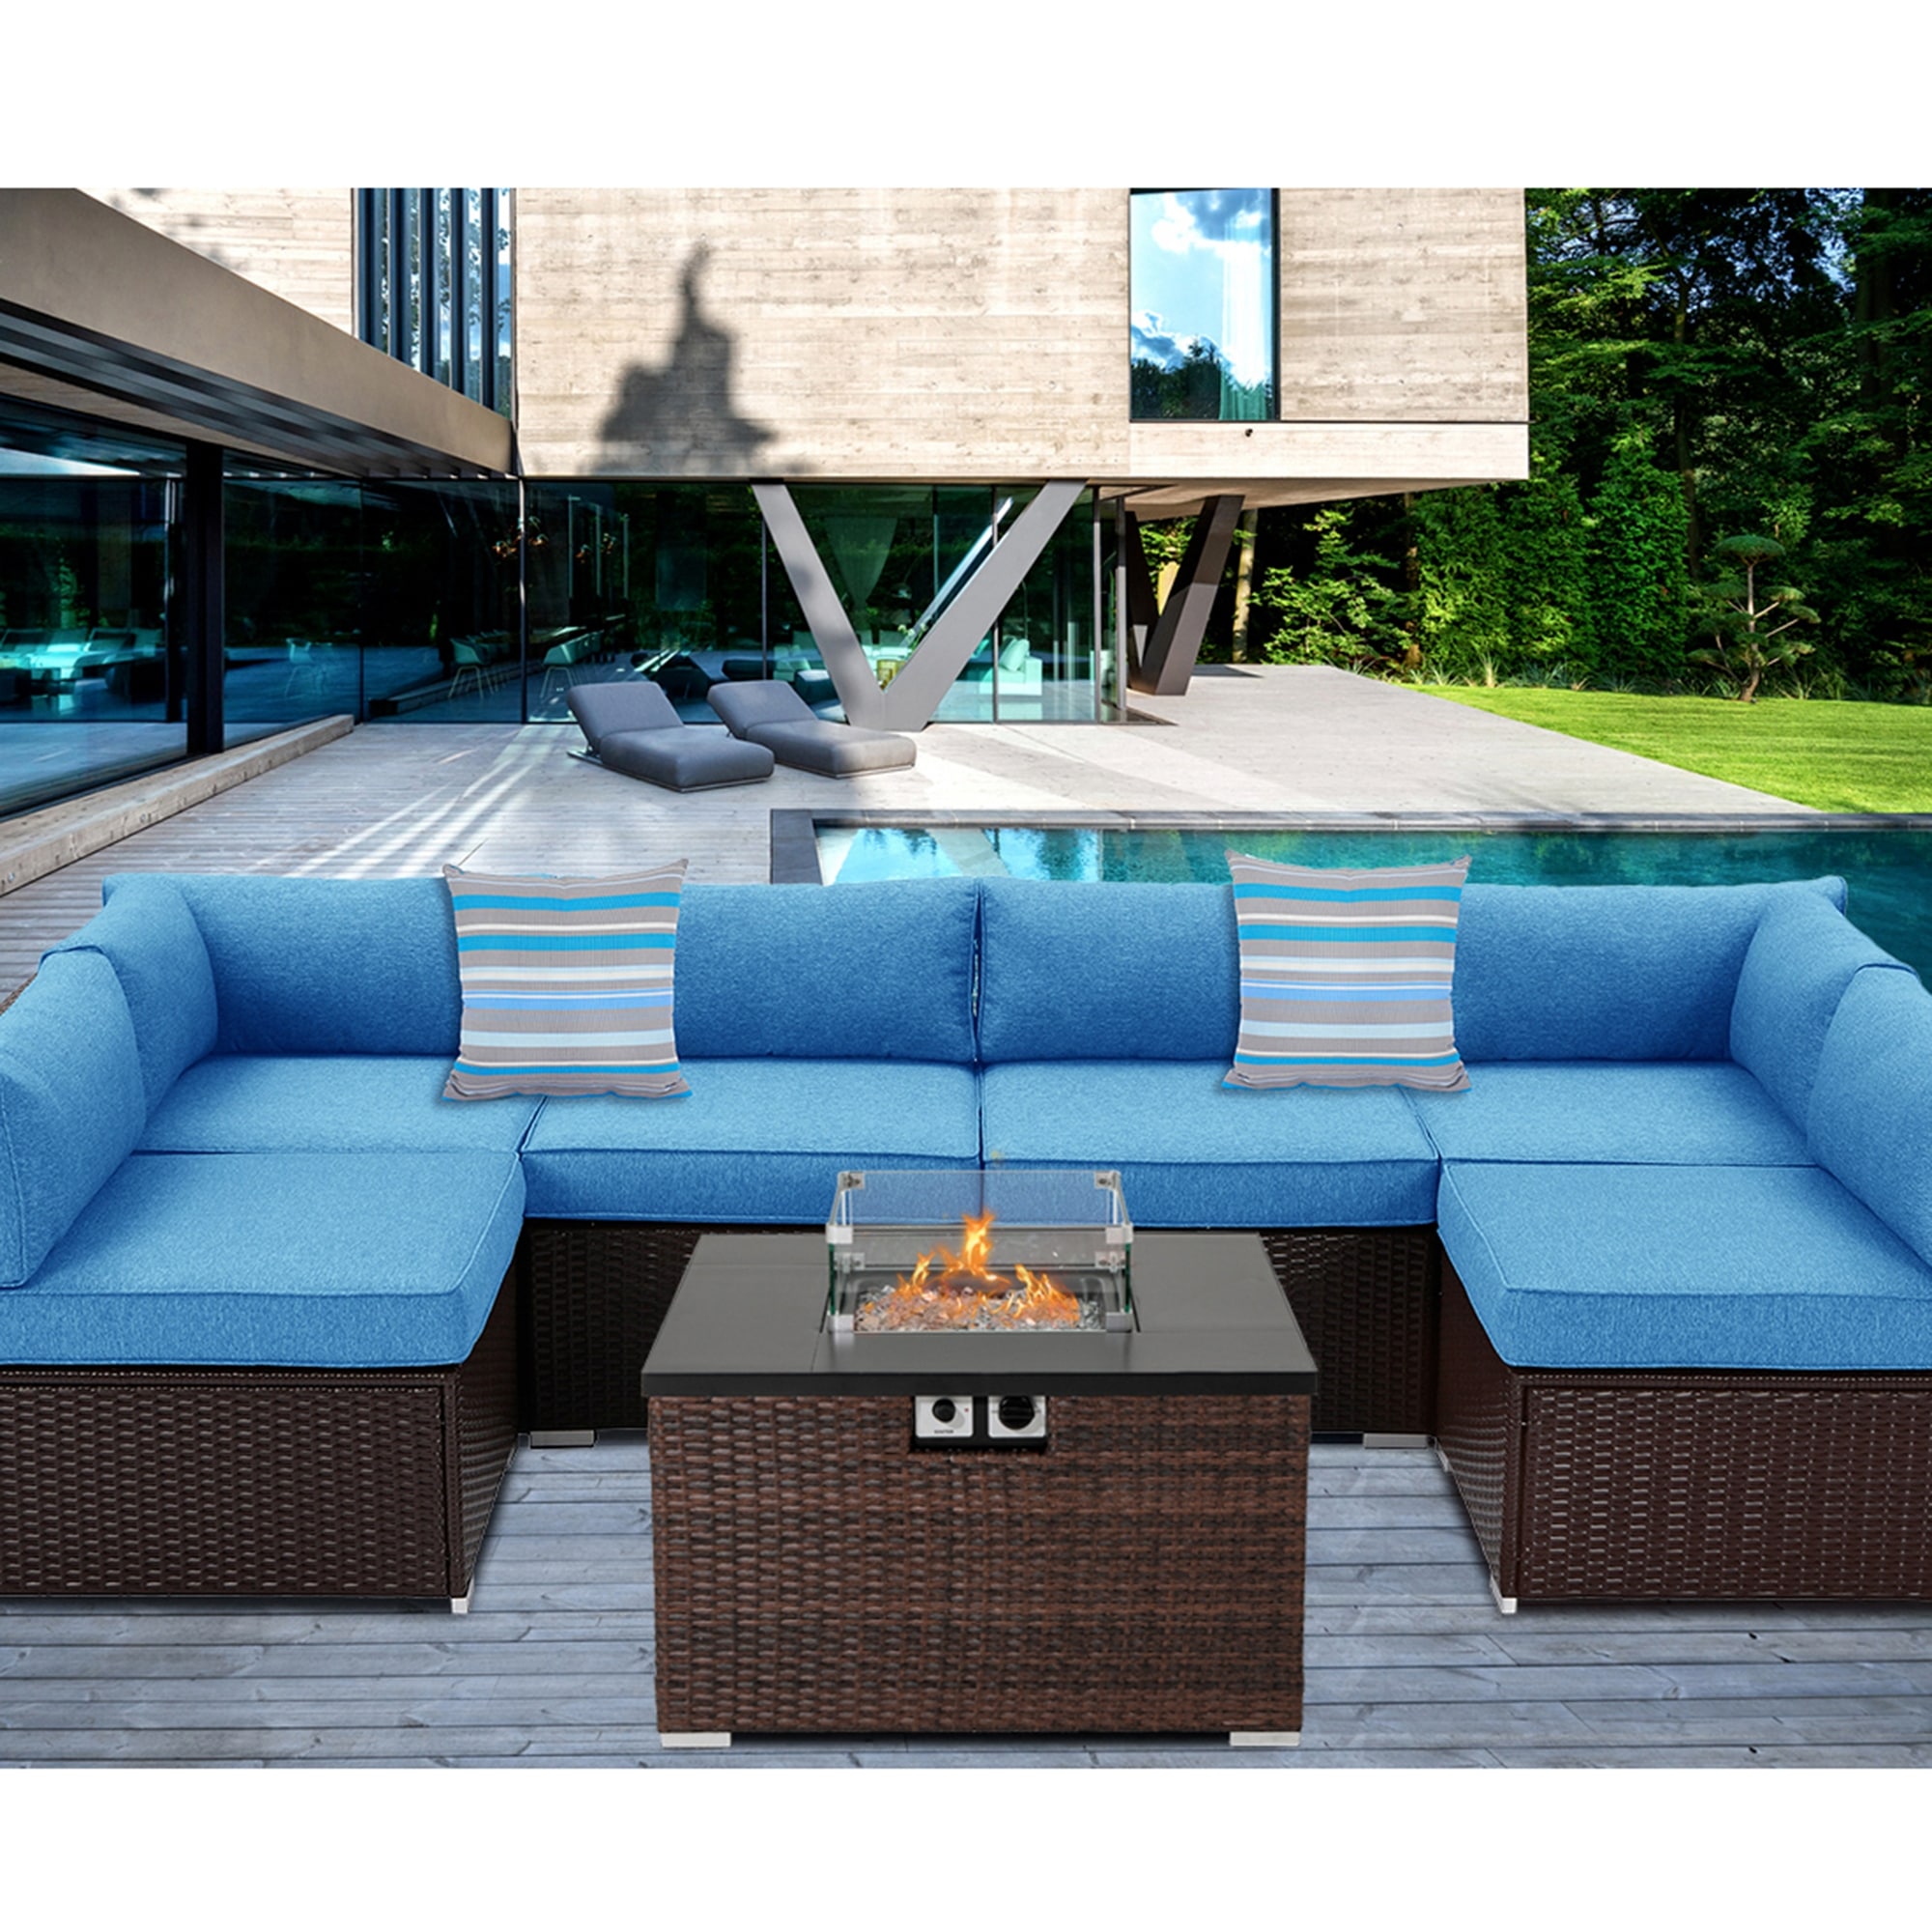 Cosiest Outdoor 7 Piece Table Patio Furniture Set With Fire Table glass Wind Guard